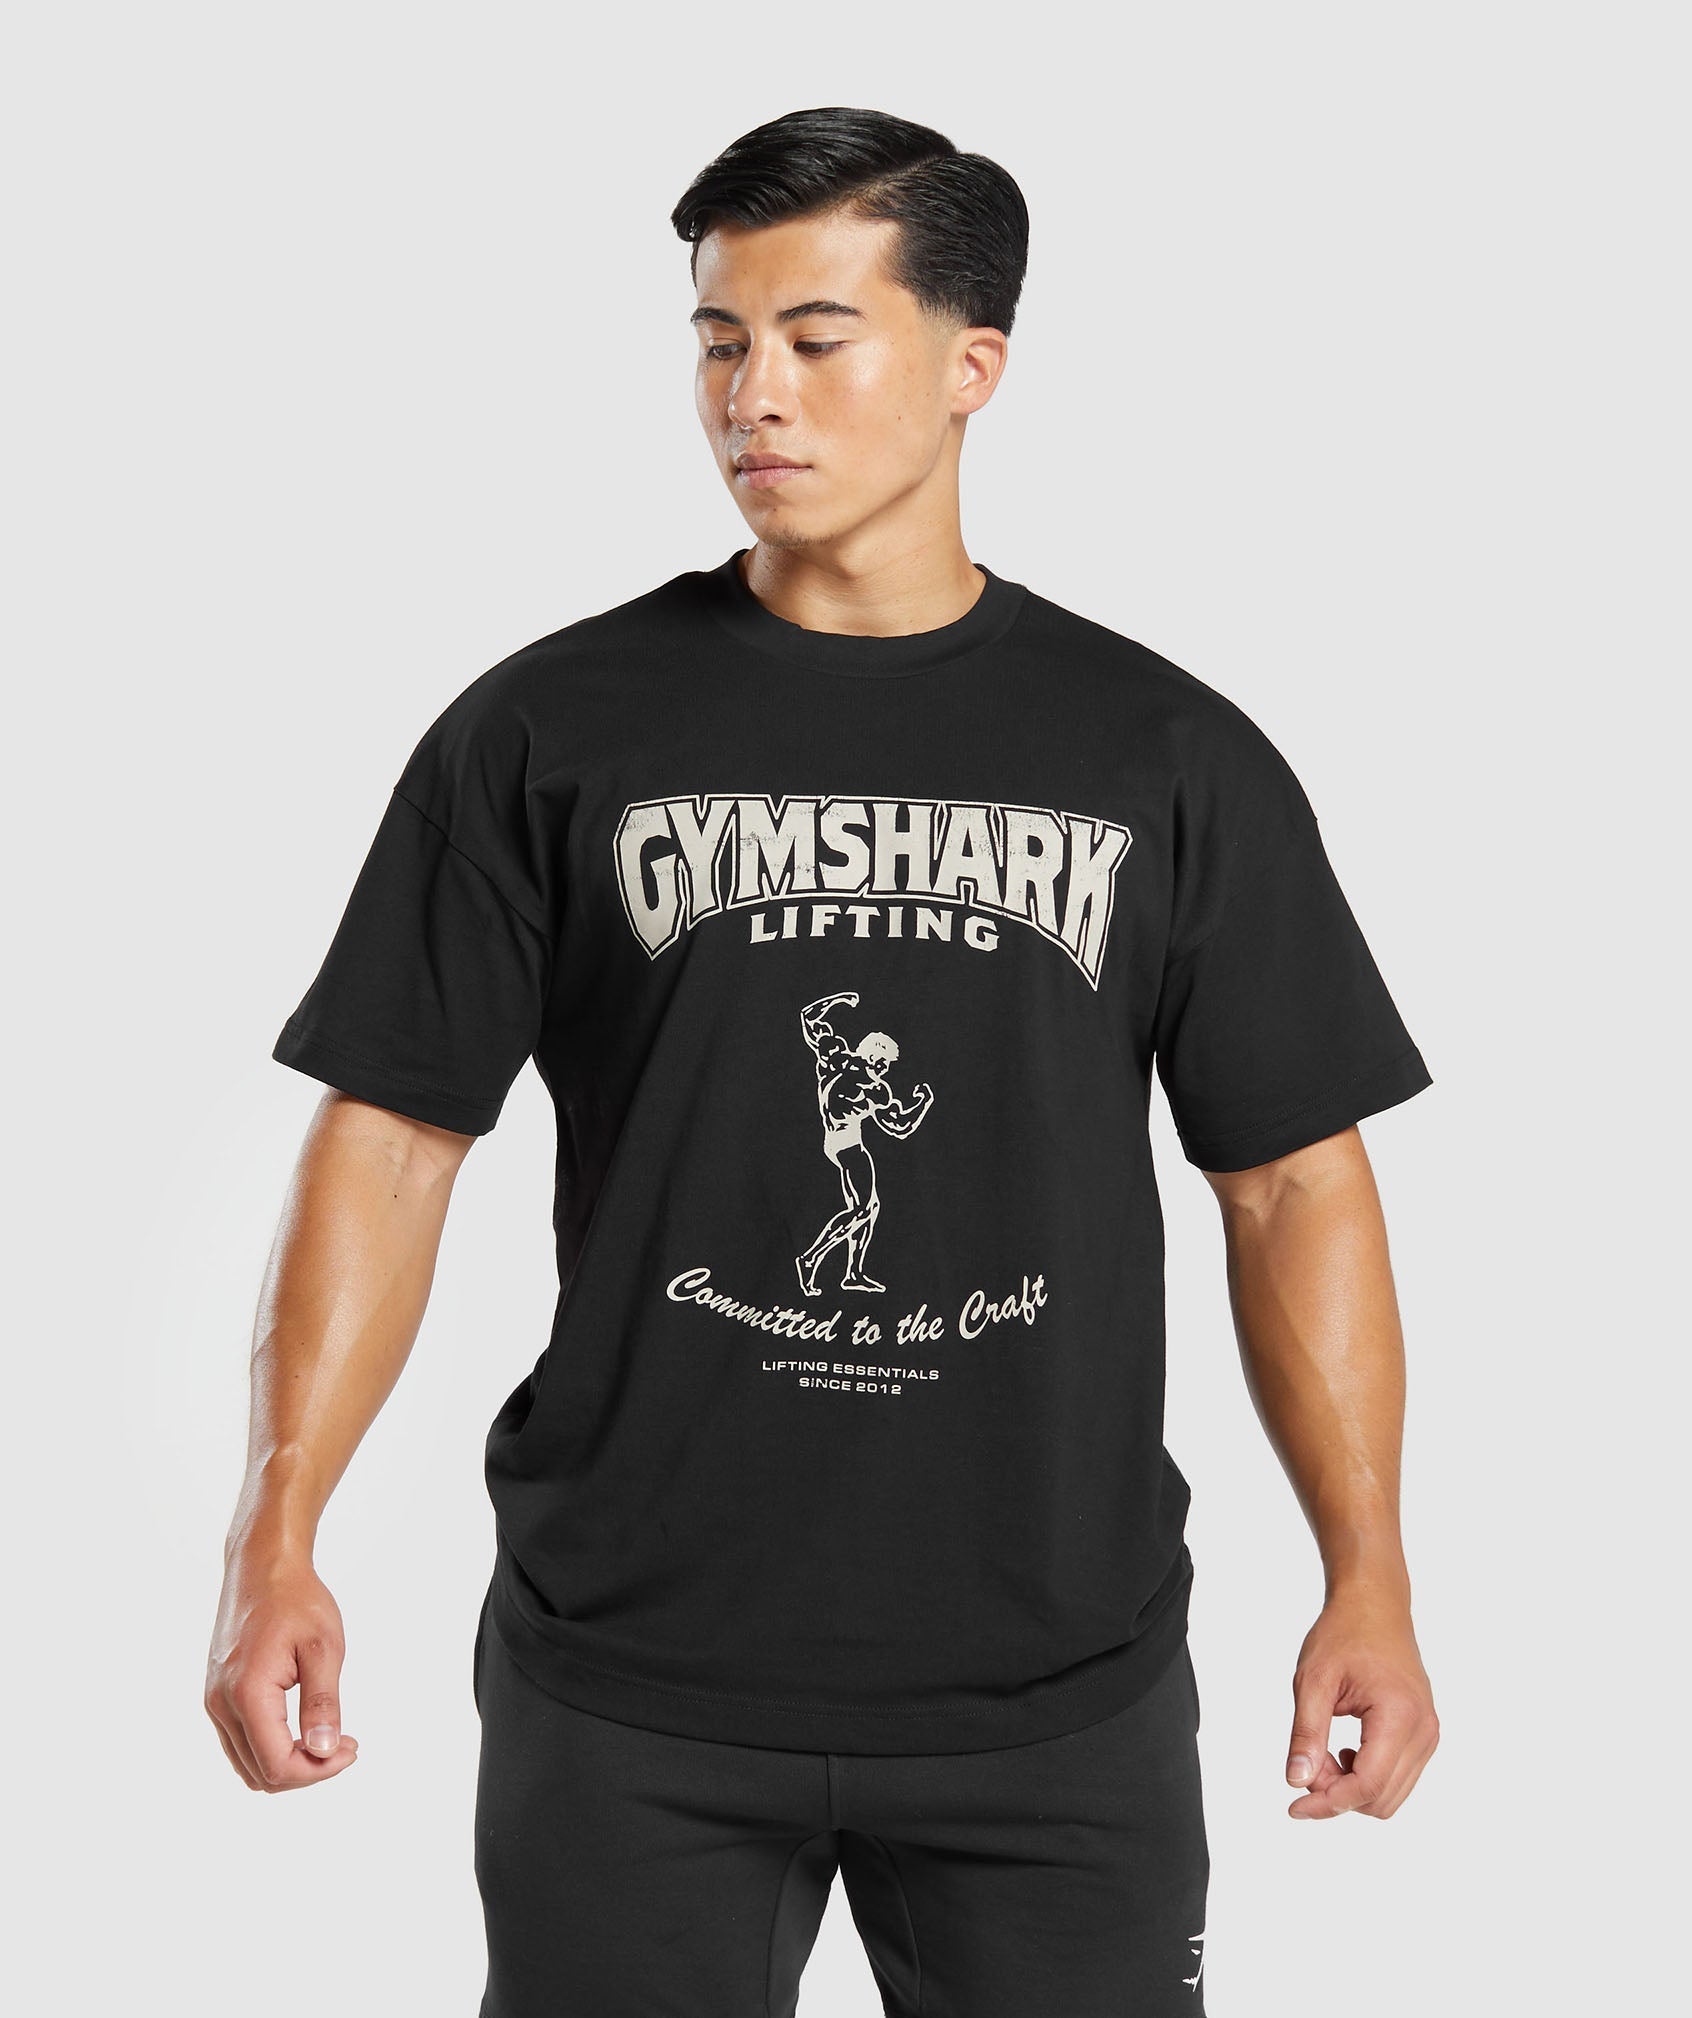 Committed to the Craft T-Shirt in Black - view 1